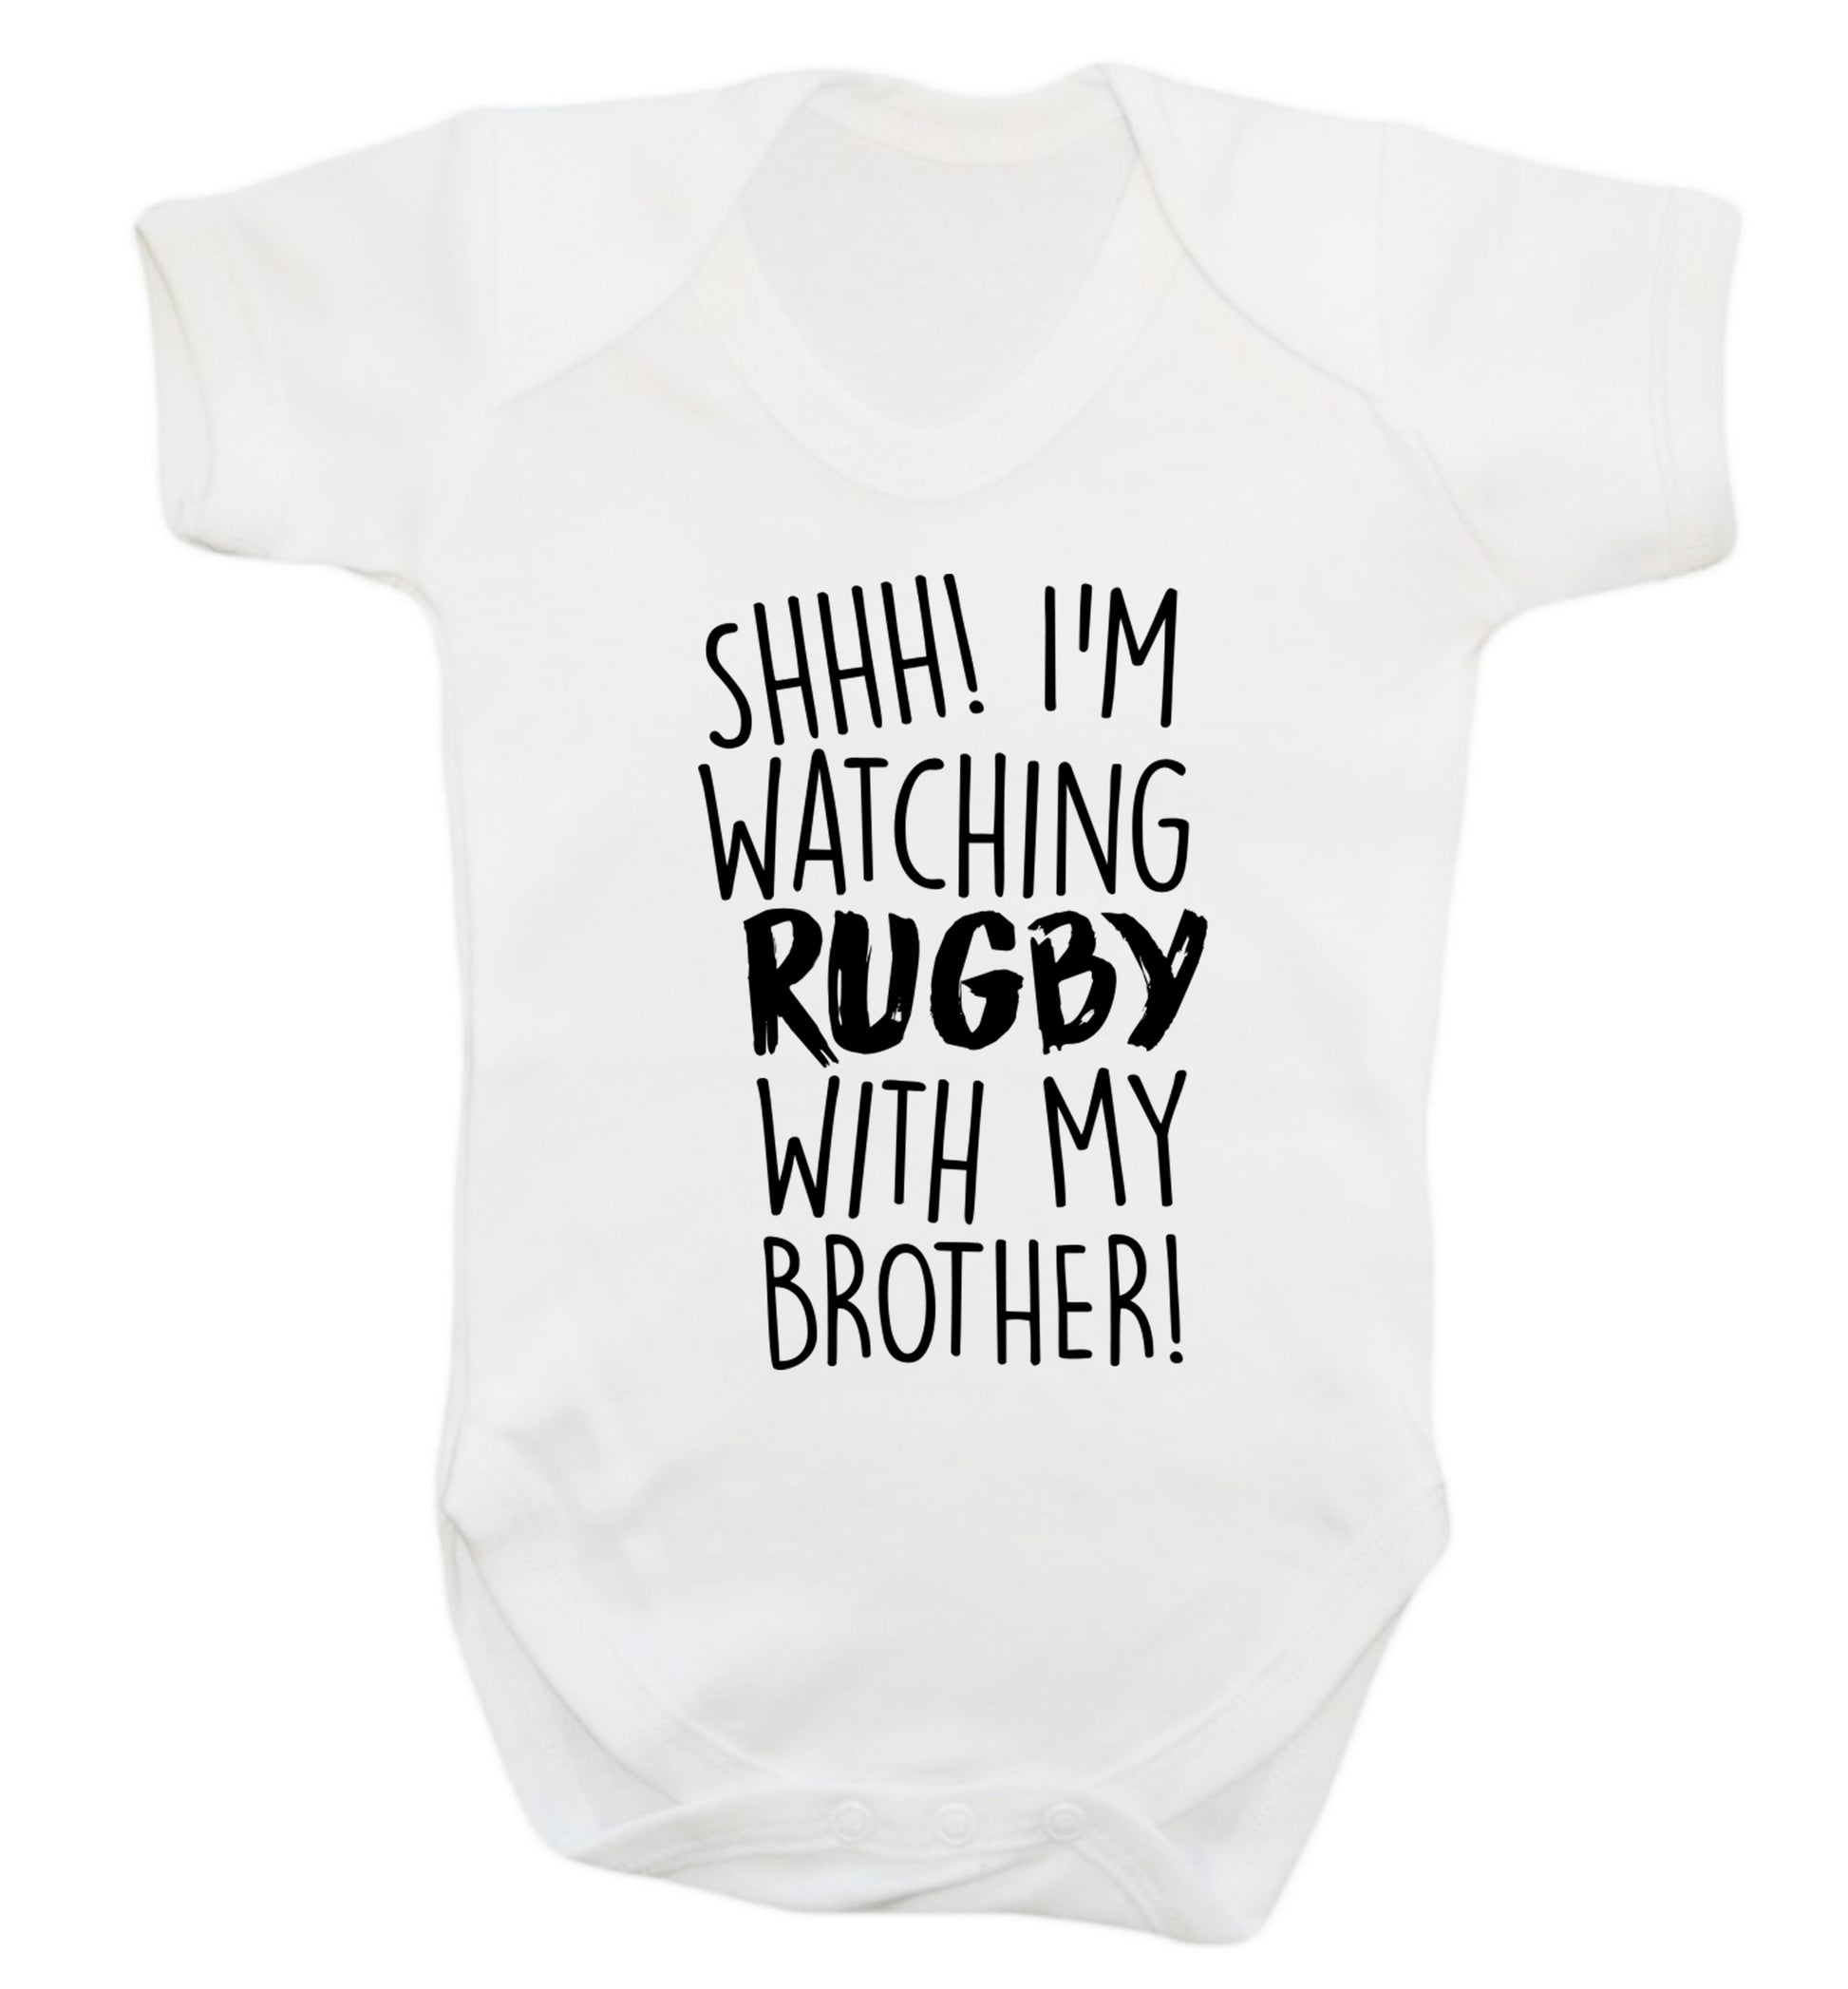 Shh... I'm watching rugby with my brother Baby Vest white 18-24 months